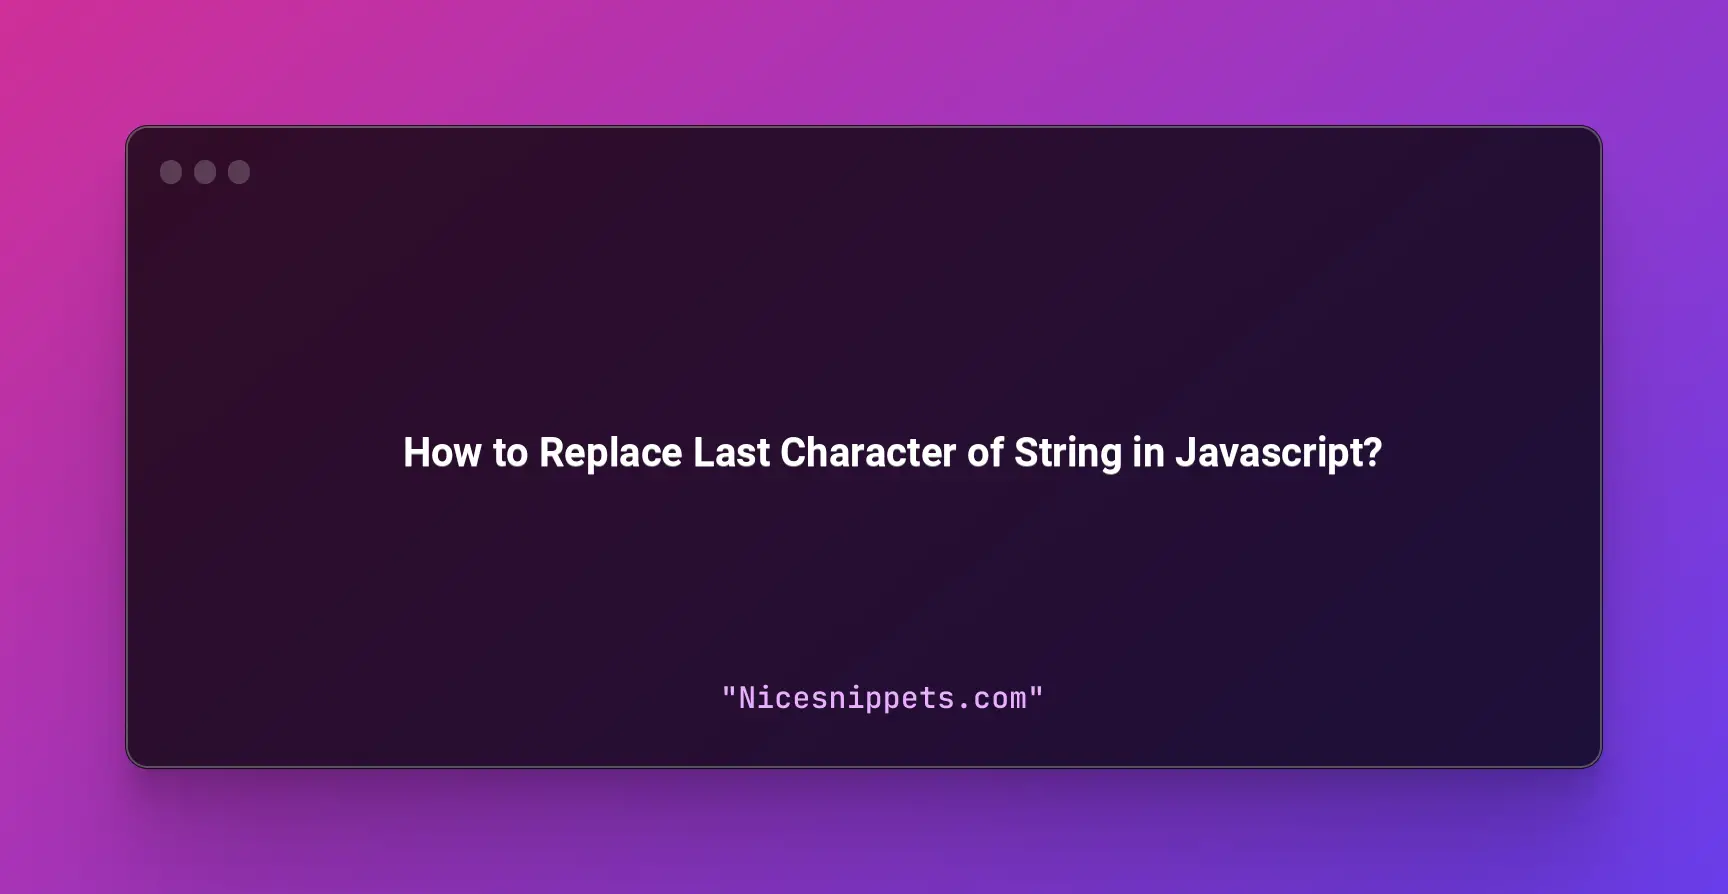 How to Replace Last Character of String in Javascript?